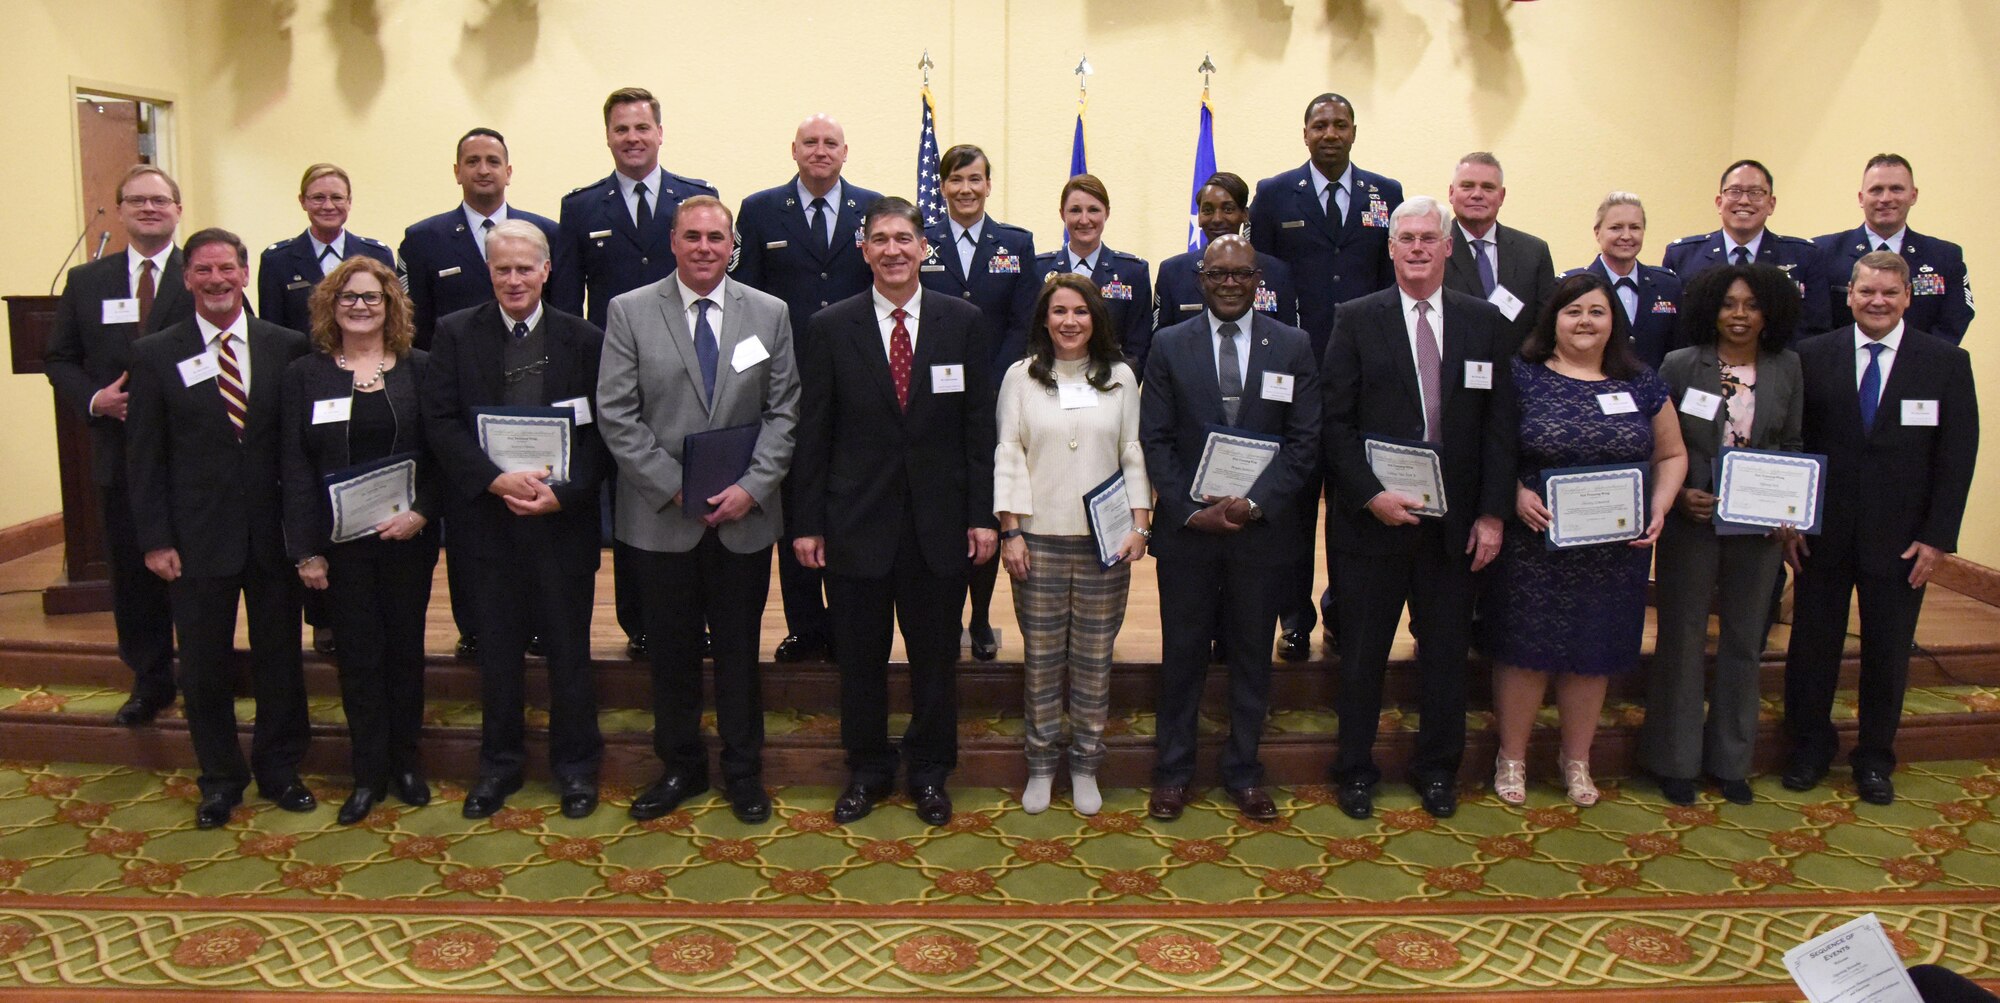 Leadership from the 81st Training Wing pose for a group photo with the newly inducted honorary commanders during the 2019 Honorary Commander Induction Ceremony inside the Bay Breeze Event Center at Keesler Air Force Base, Mississippi, Feb. 9, 2019. The event recognized the newest members of Keesler's honorary commander program, which is a partnership between military commanders and local civic and business leaders in order to enrich and strengthen the relationship between the base and the community. This was the first time leadership from the 2nd Air Force, 81st Training Wing and 403rd Wing combined to host a single joint induction ceremony. (U.S. Air Force photo by Kemberly Groue)